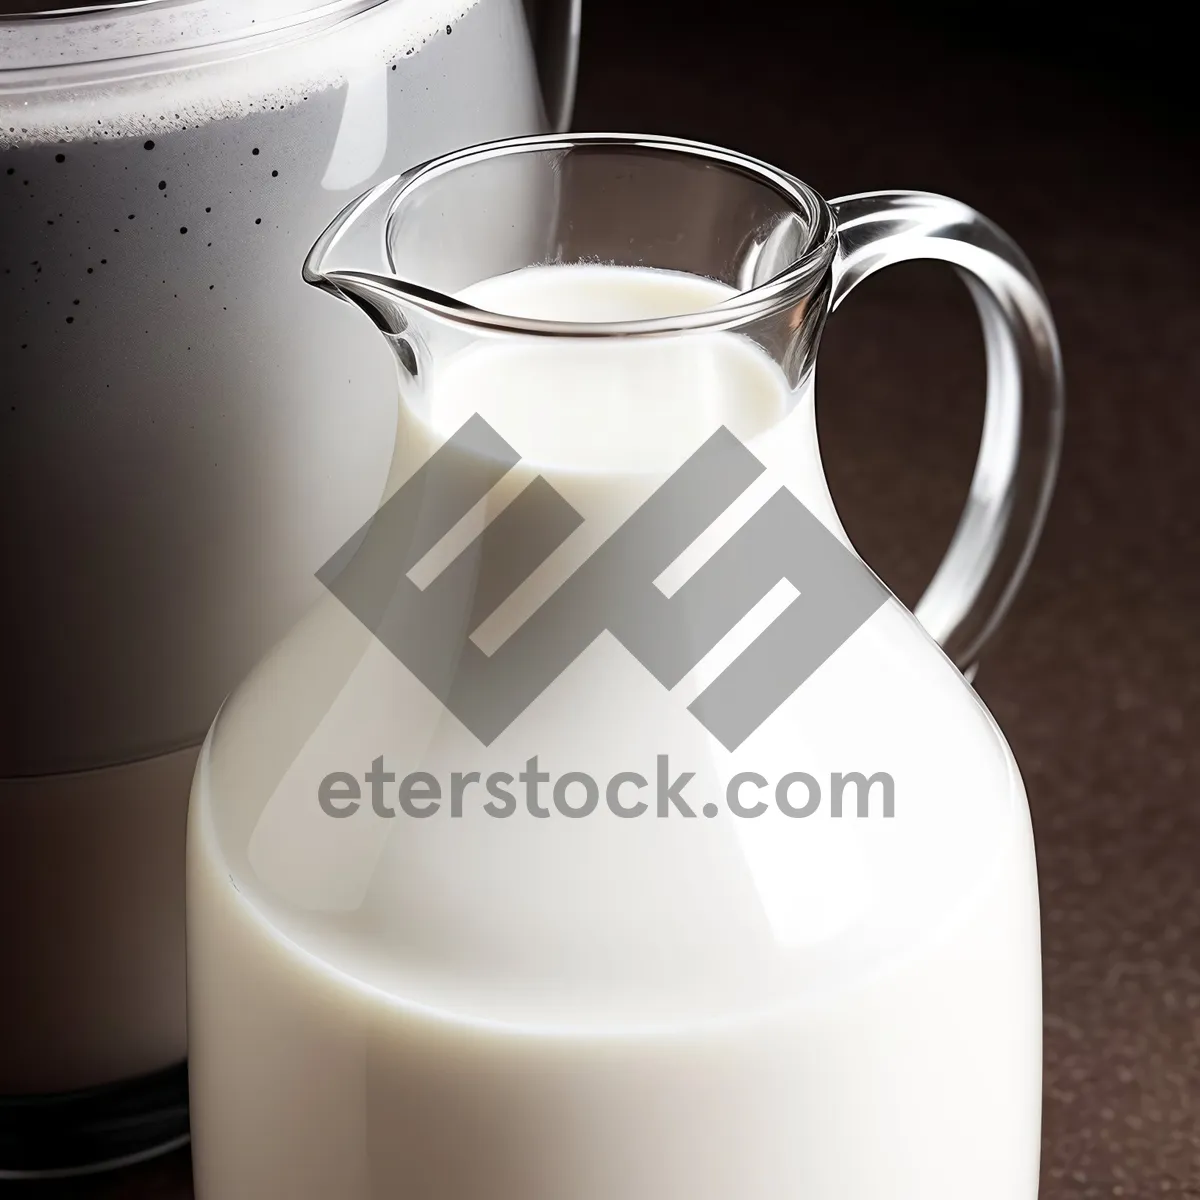 Picture of Refreshing Morning Drink in Ceramic Pitcher.